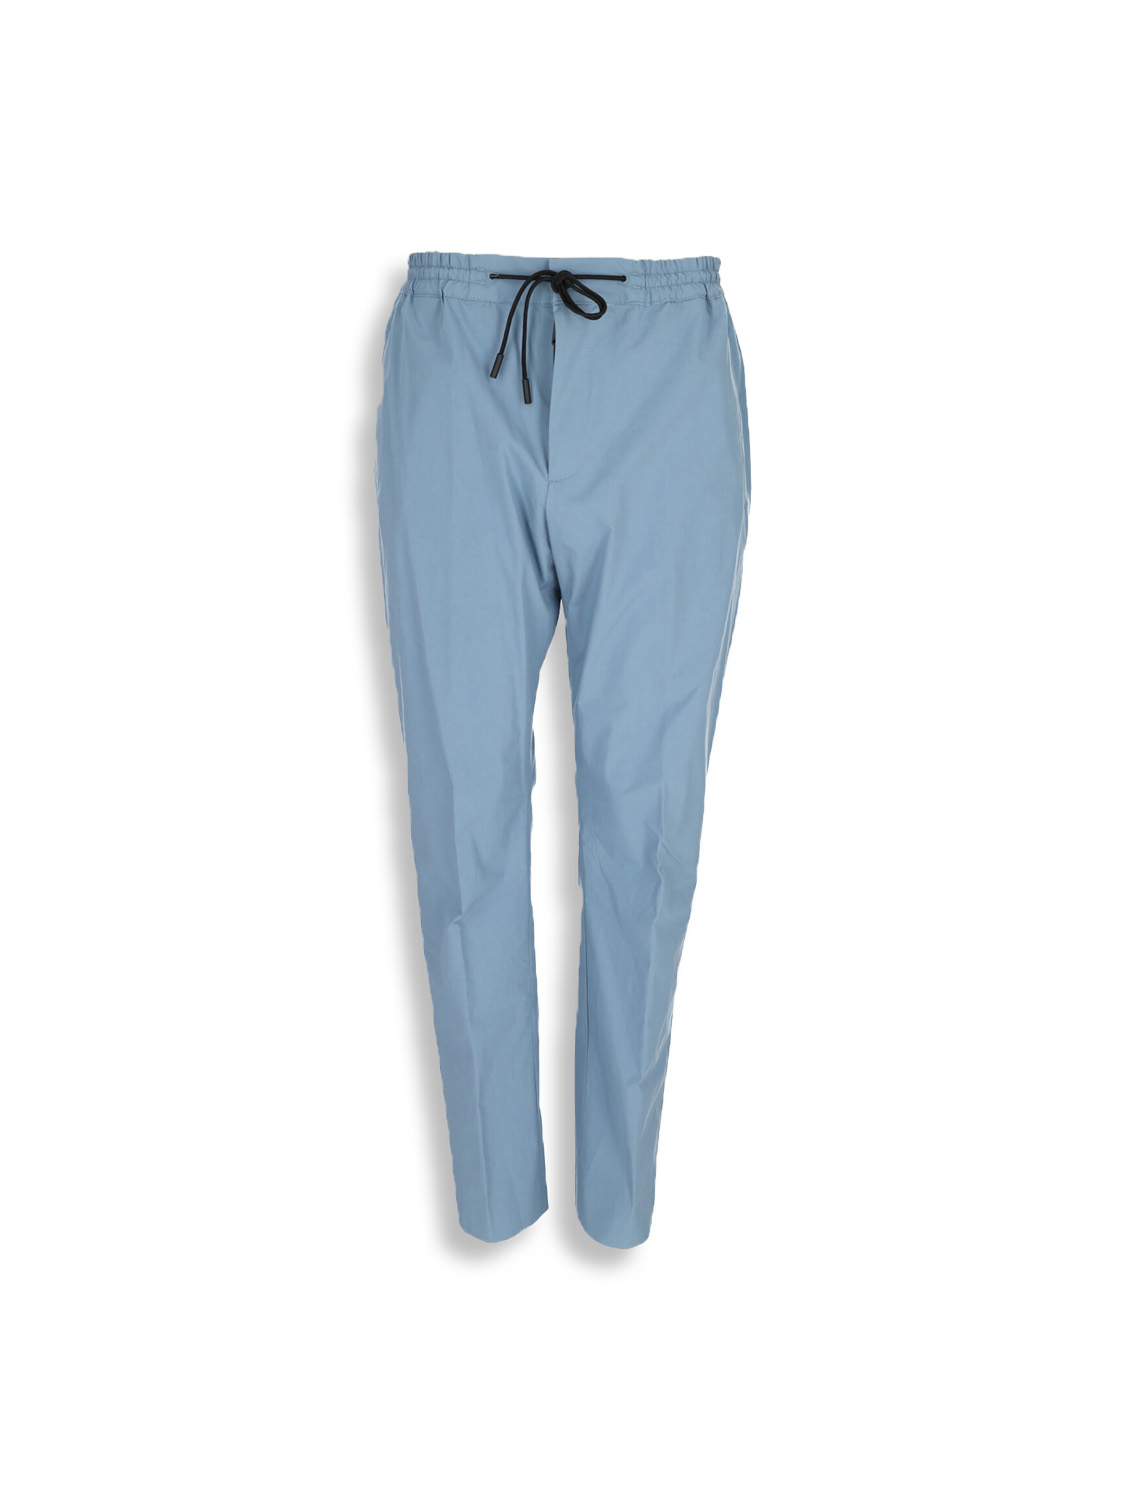 Stretch trousers with cotton elastic waistband